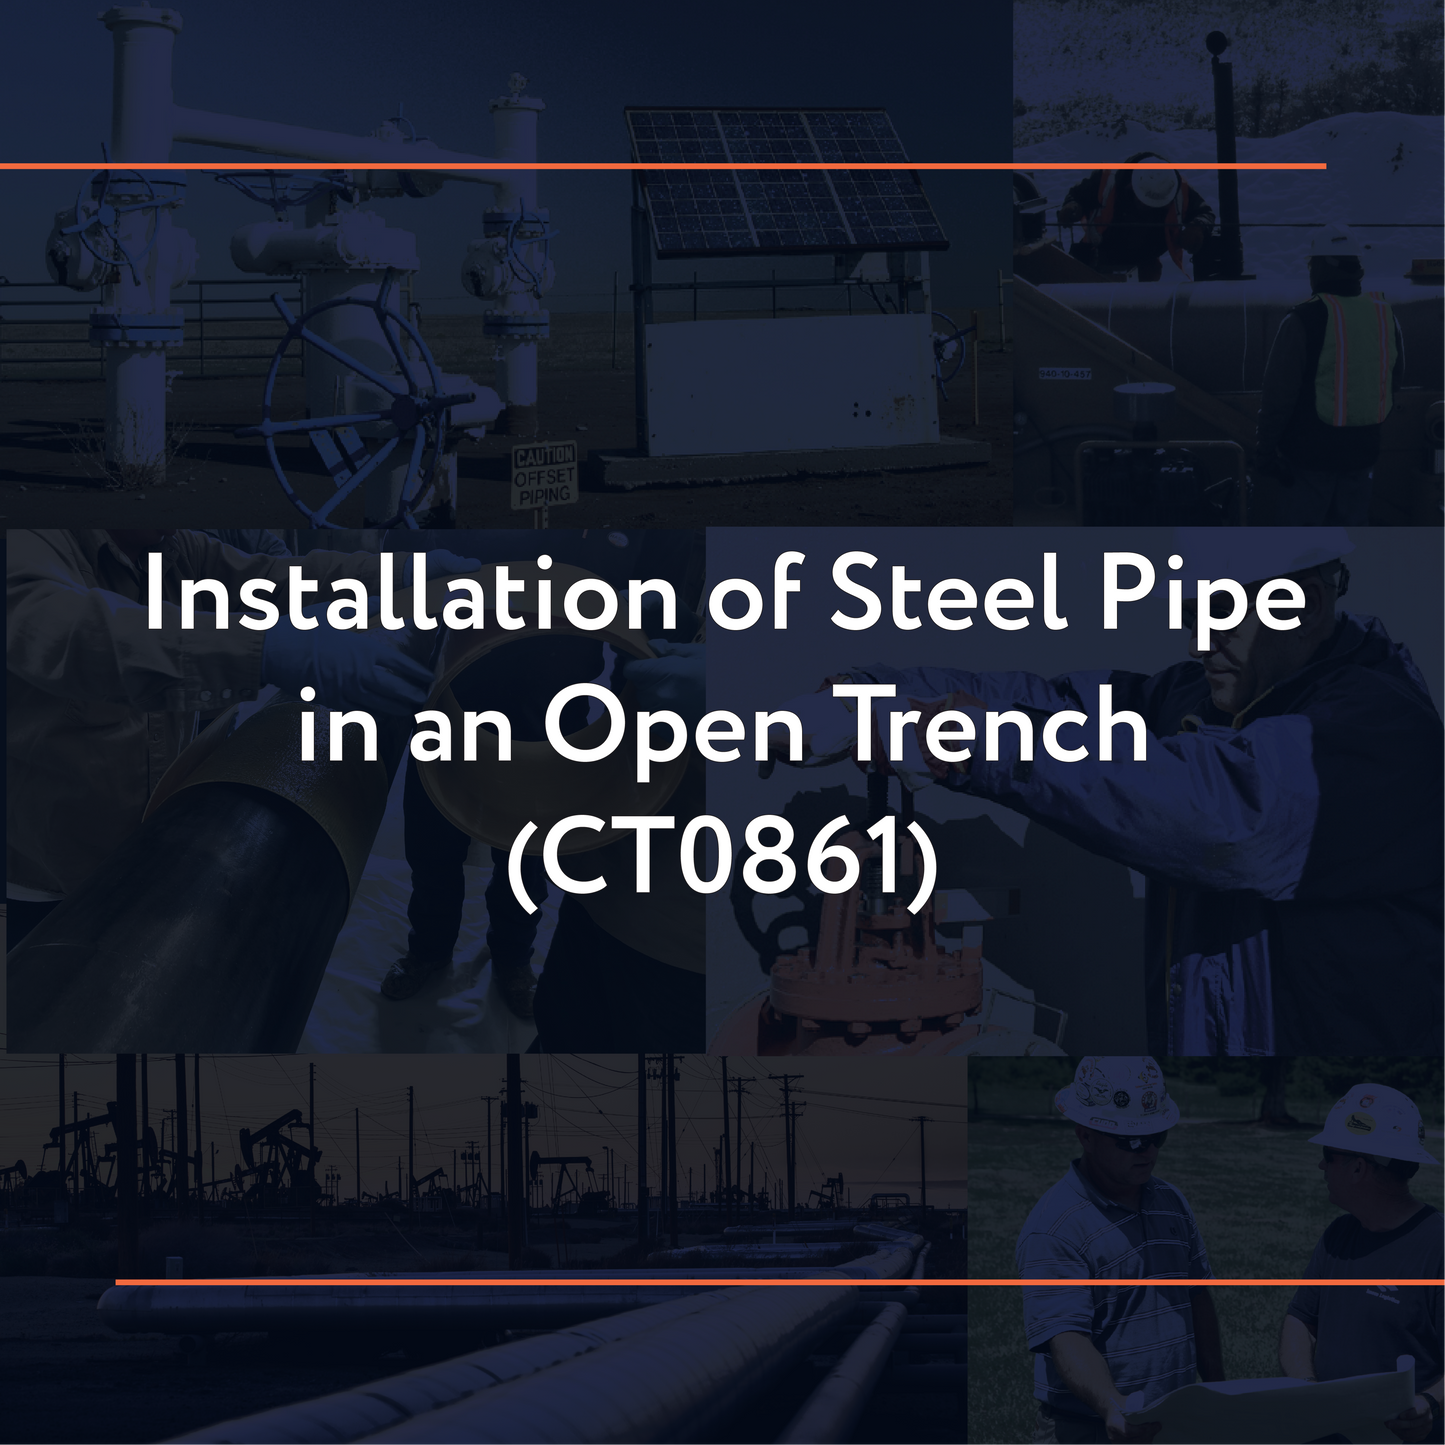 CT0861: Installation of Steel Pipe in an Open Trench